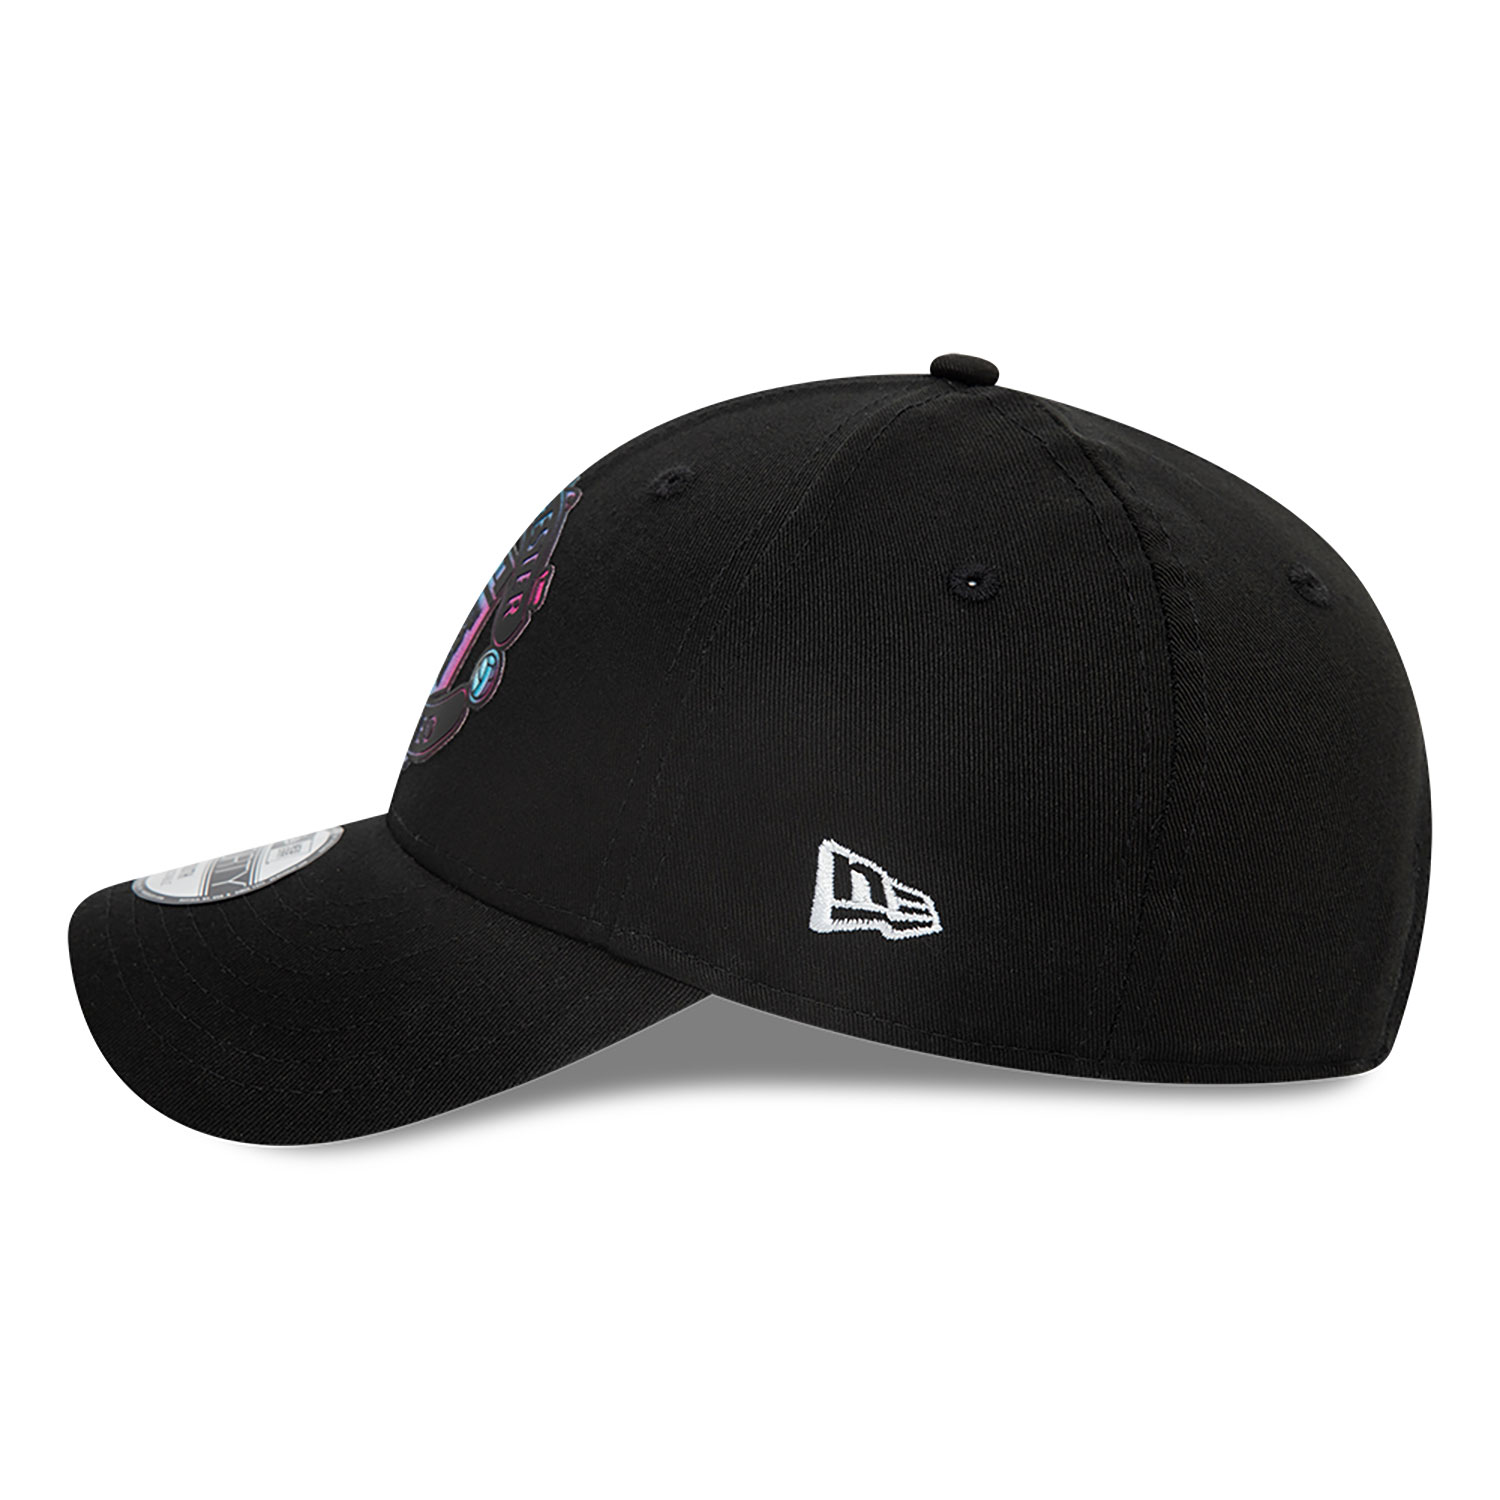 Manchester United FC Youth Holographic Black 9FORTY Adjustable Cap